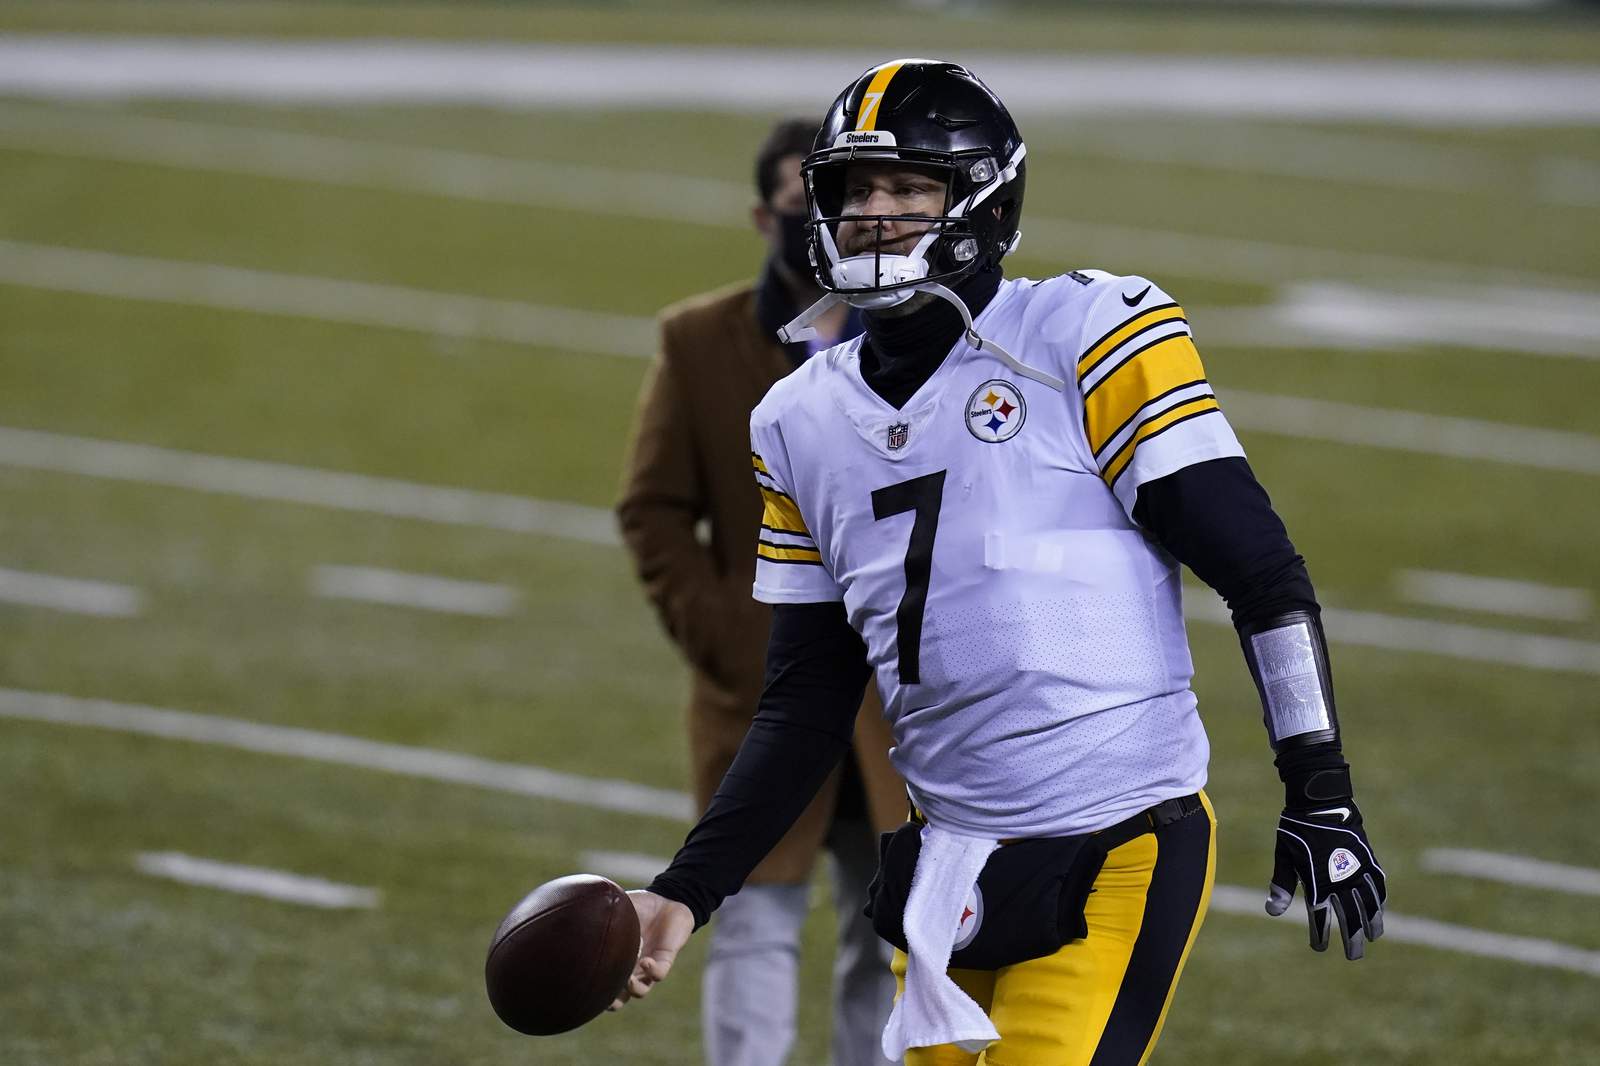 Struggling Steelers in midst of historic collapse